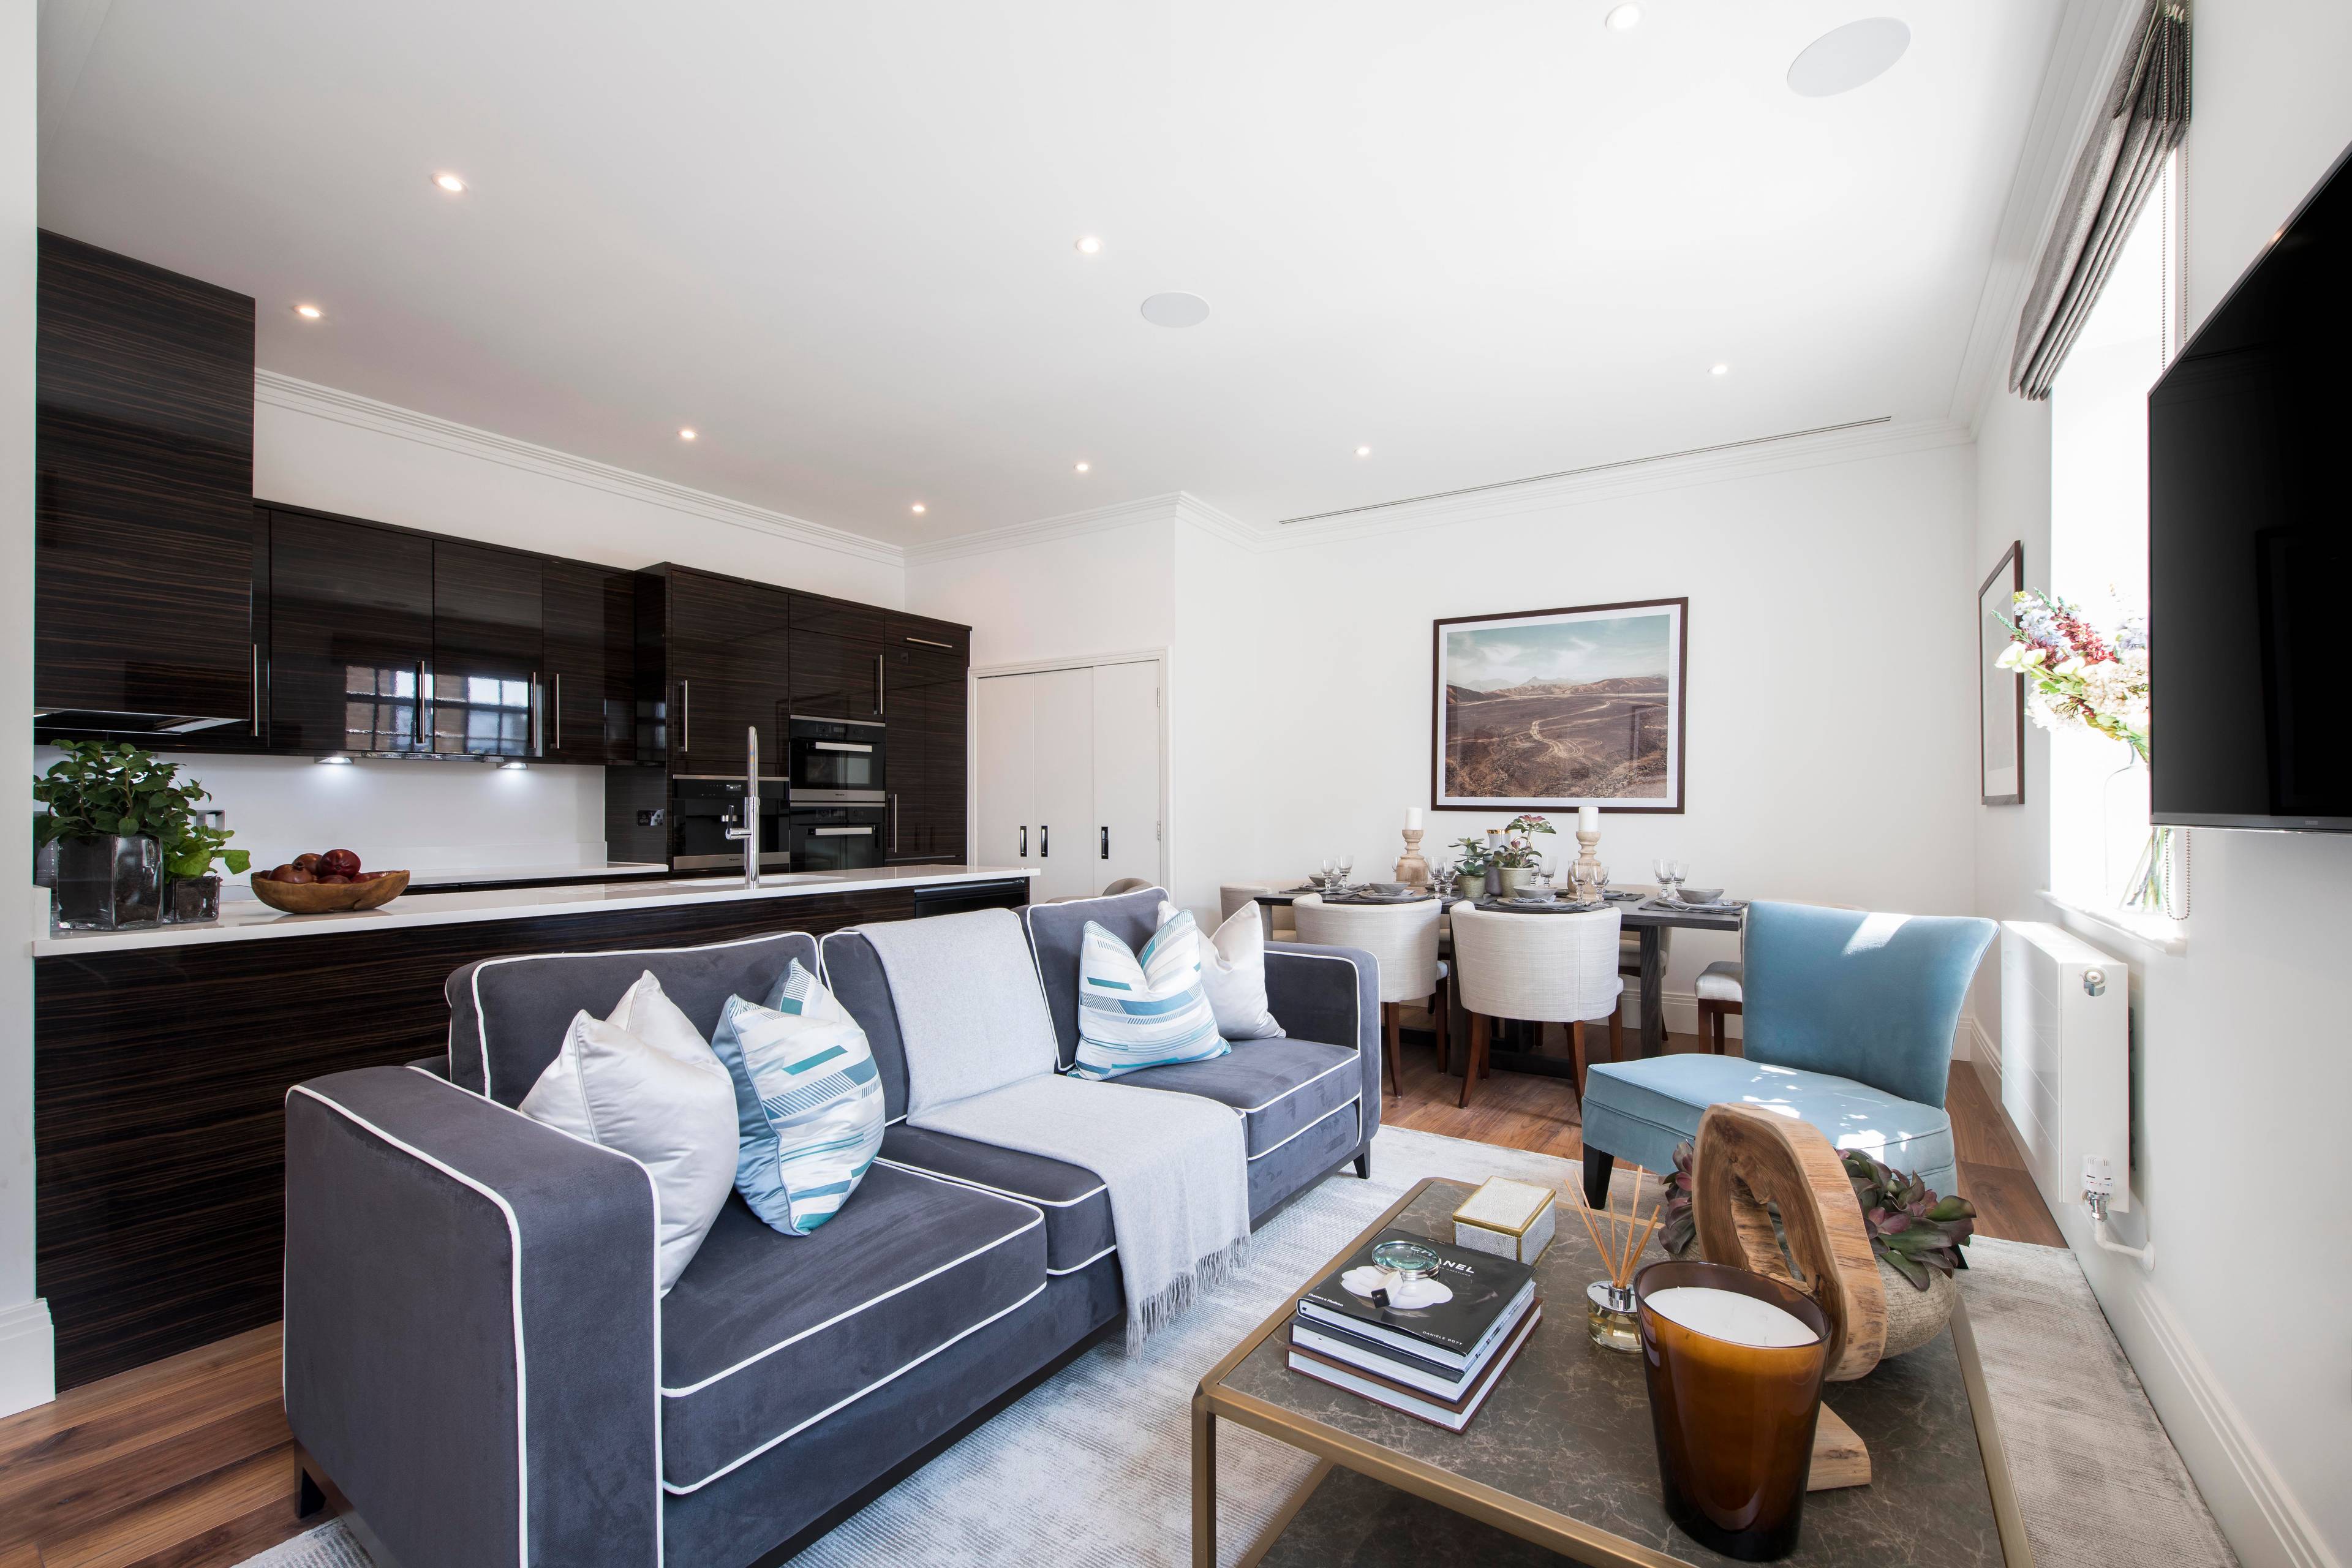 A spectacular duplex interior designed three bedroom, three bathroom apartment with a private balcony and roof terrace, offering stunning views of the River Thames and set within this newly converted, warehouse style, gated development.